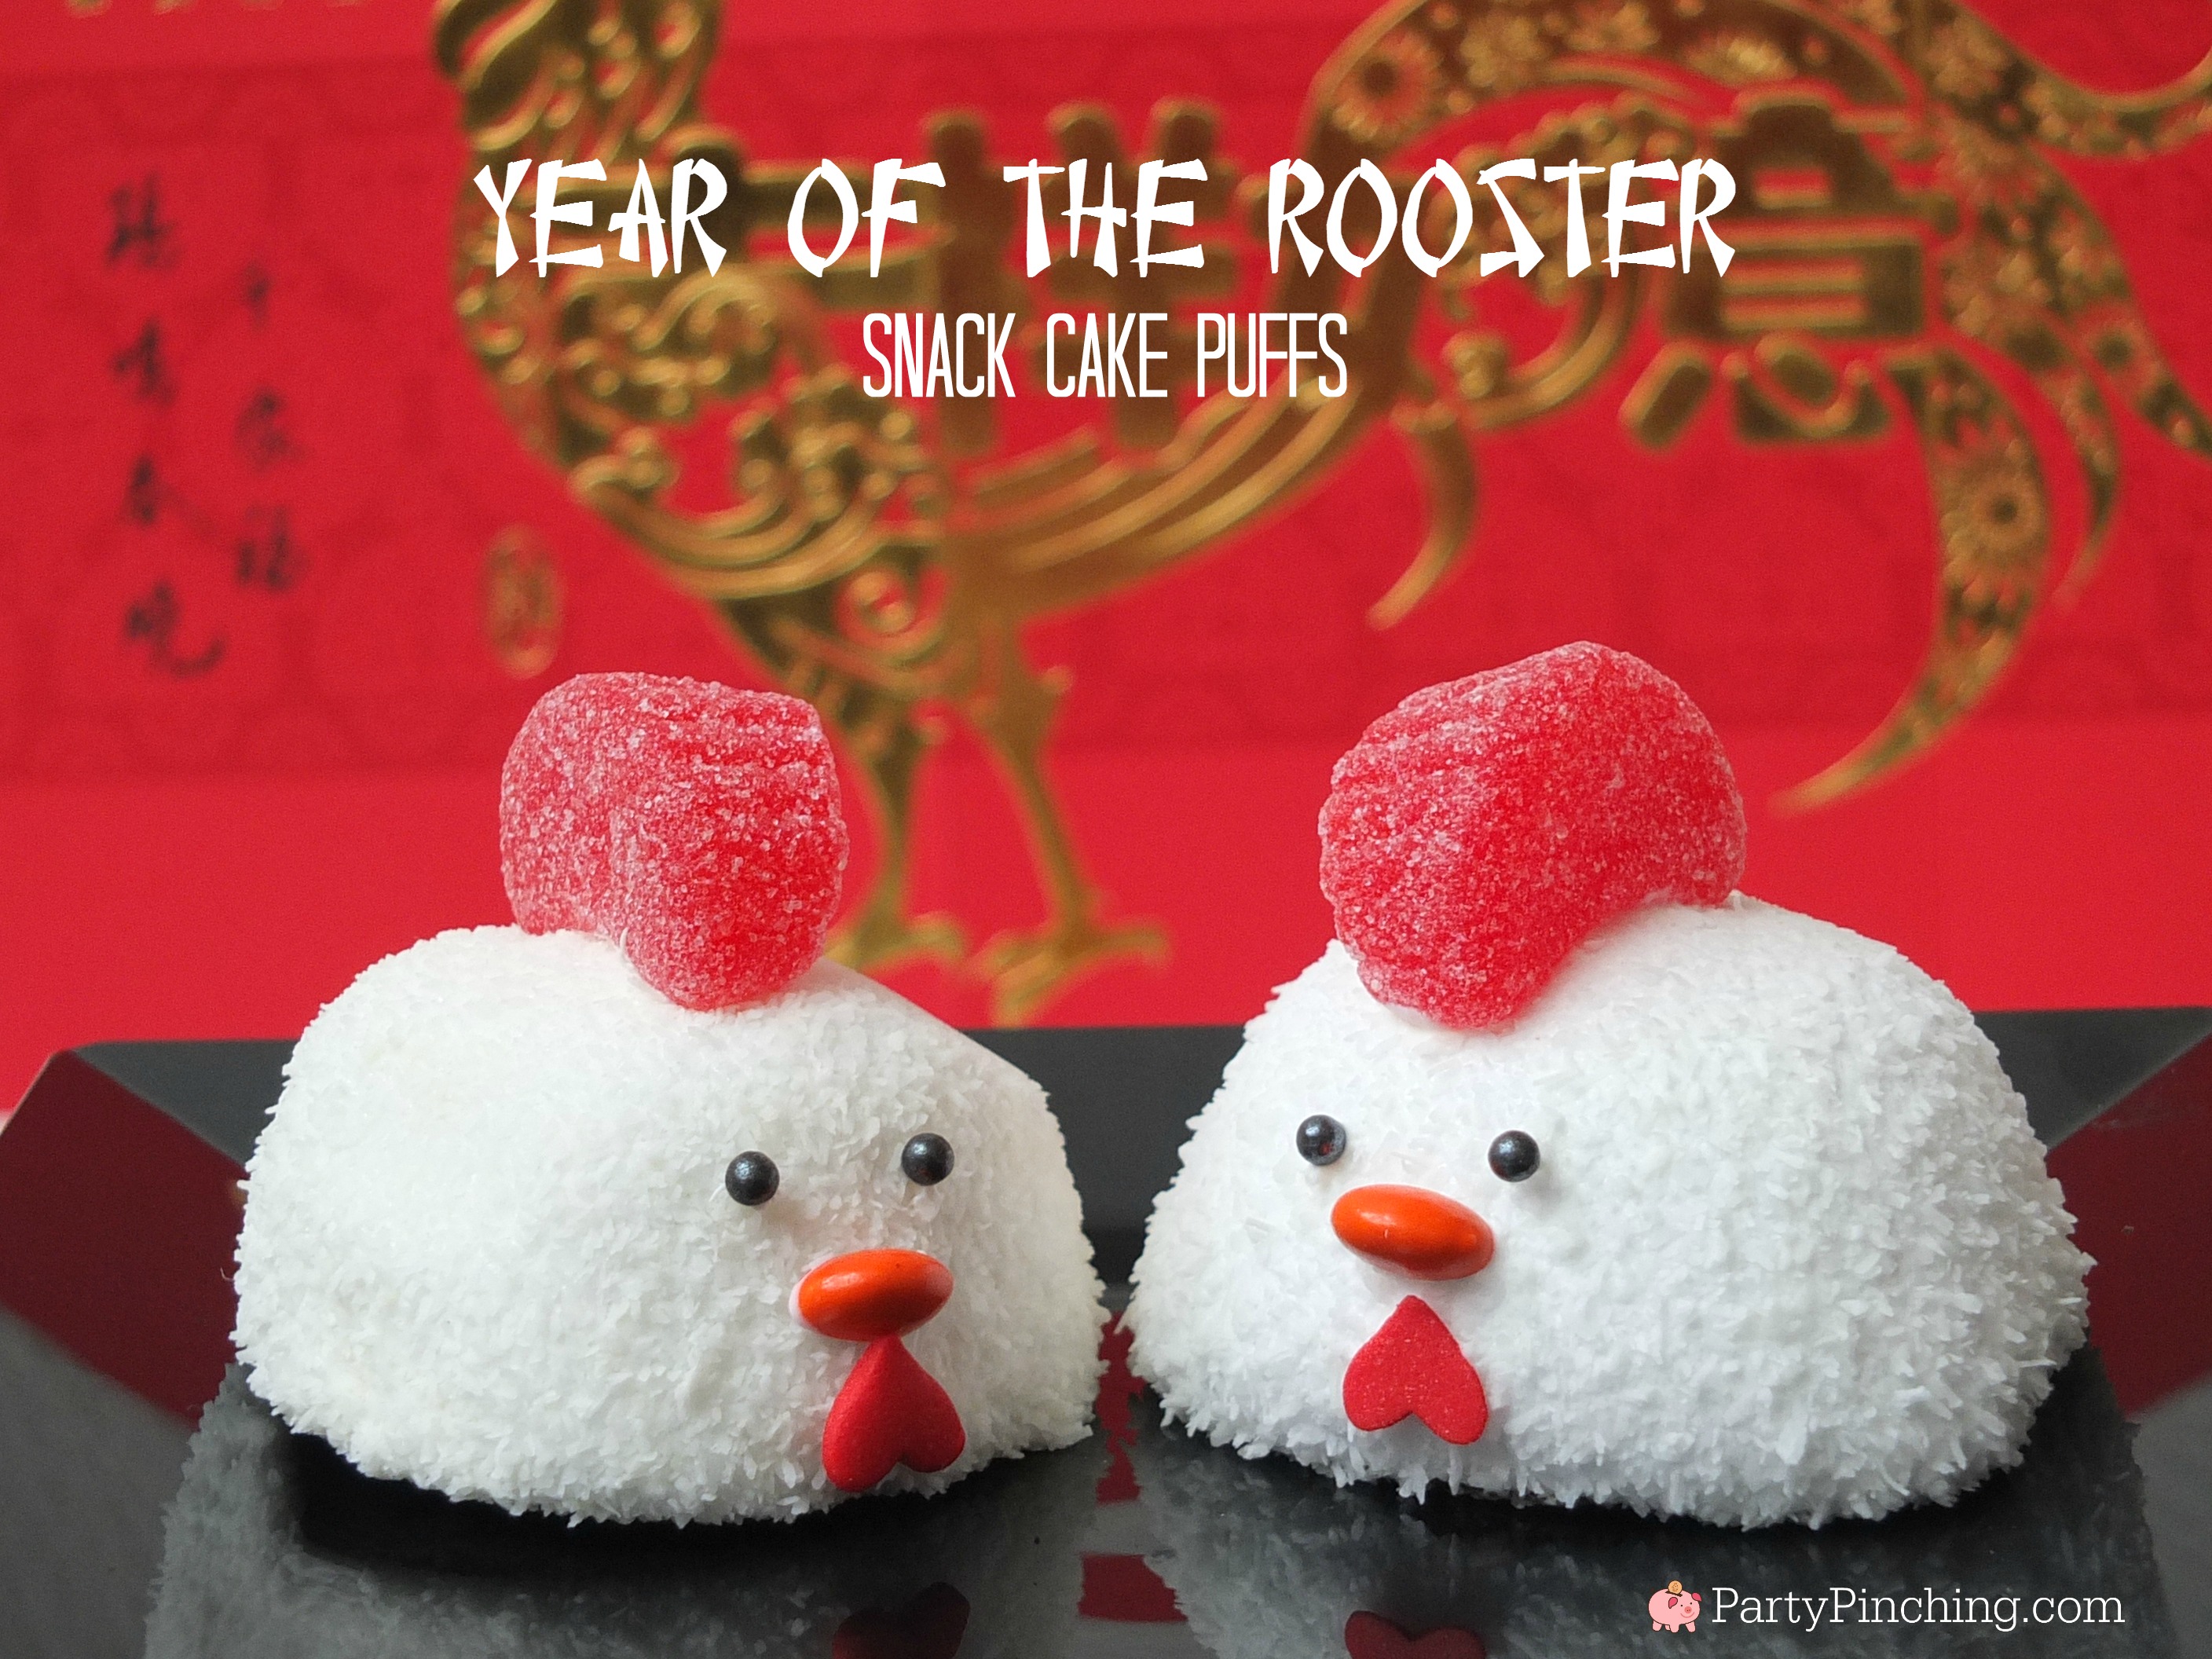 Year of the Rooster Snack Cake Puffs, Chinese New Year Rooster dessert, Lunar New Year Rooster treat, fun food for kids, sweet treats, cute Rooster snack cake, Chinese New Year Lunar New Year food ideas, cute food, adorable rooster 